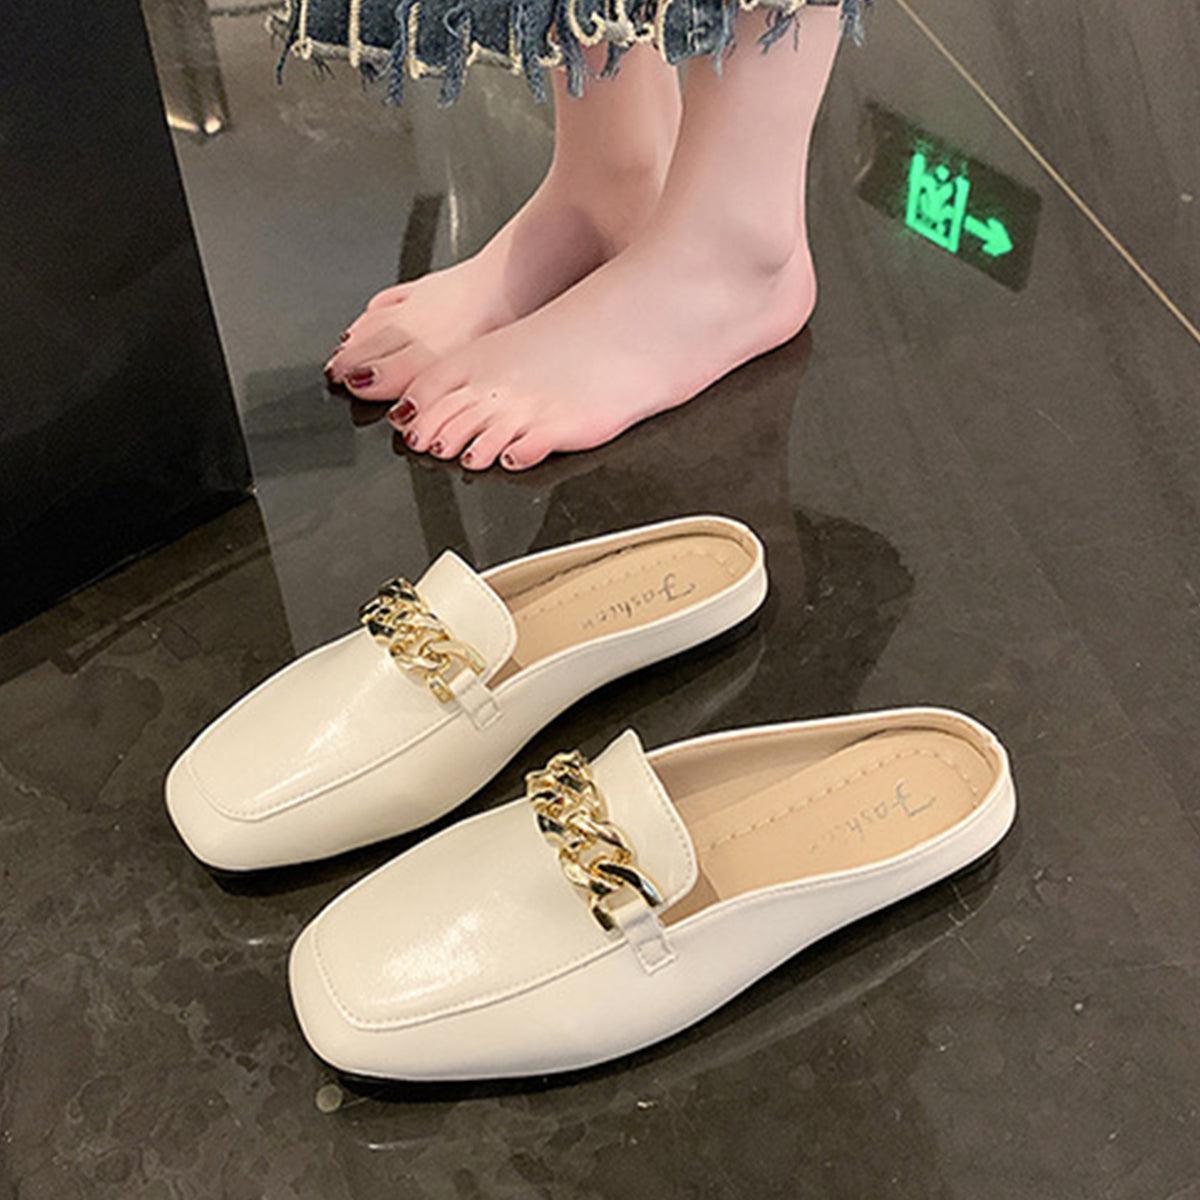 a woman's feet with a pair of white shoes